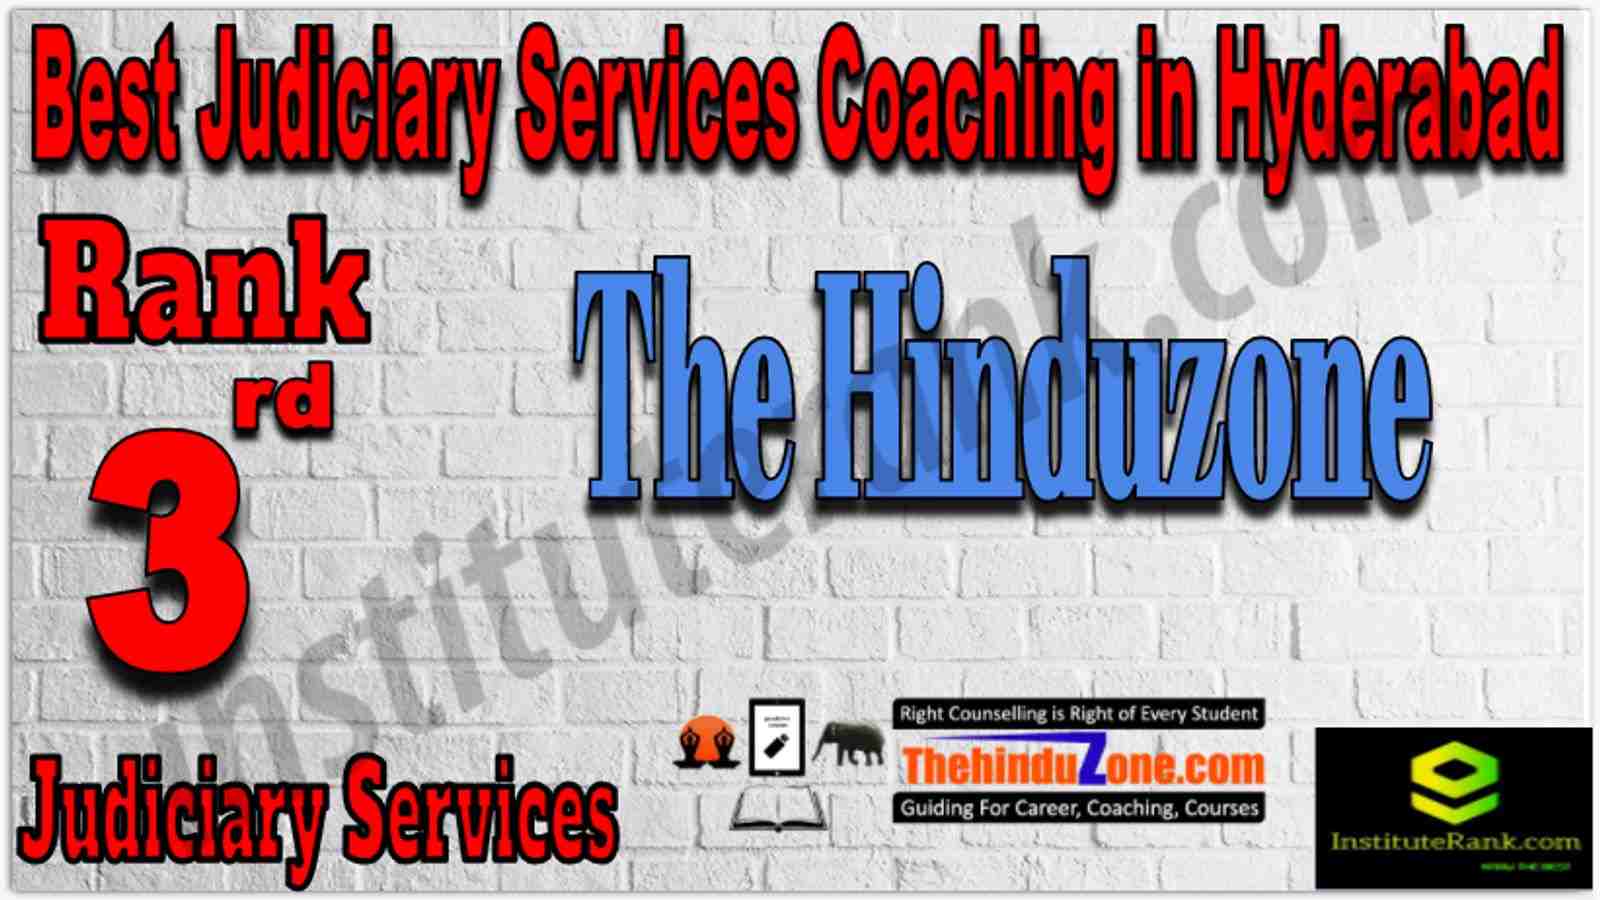 Rank 3 Best Judiciary Services Coaching in Hyderabad